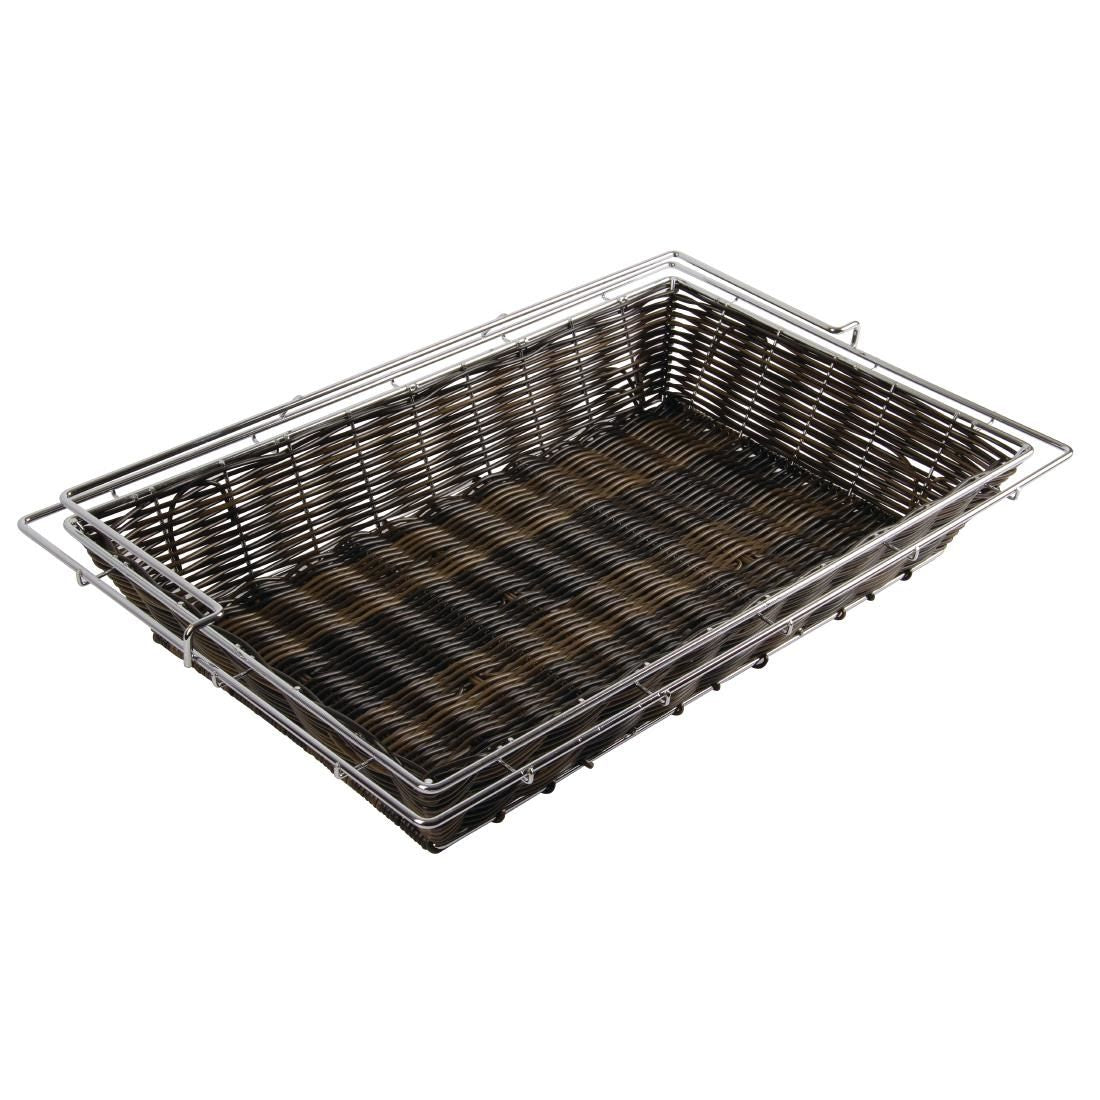 GC943 APS Frames Polyratten 1/1 GN Basket with Frame JD Catering Equipment Solutions Ltd